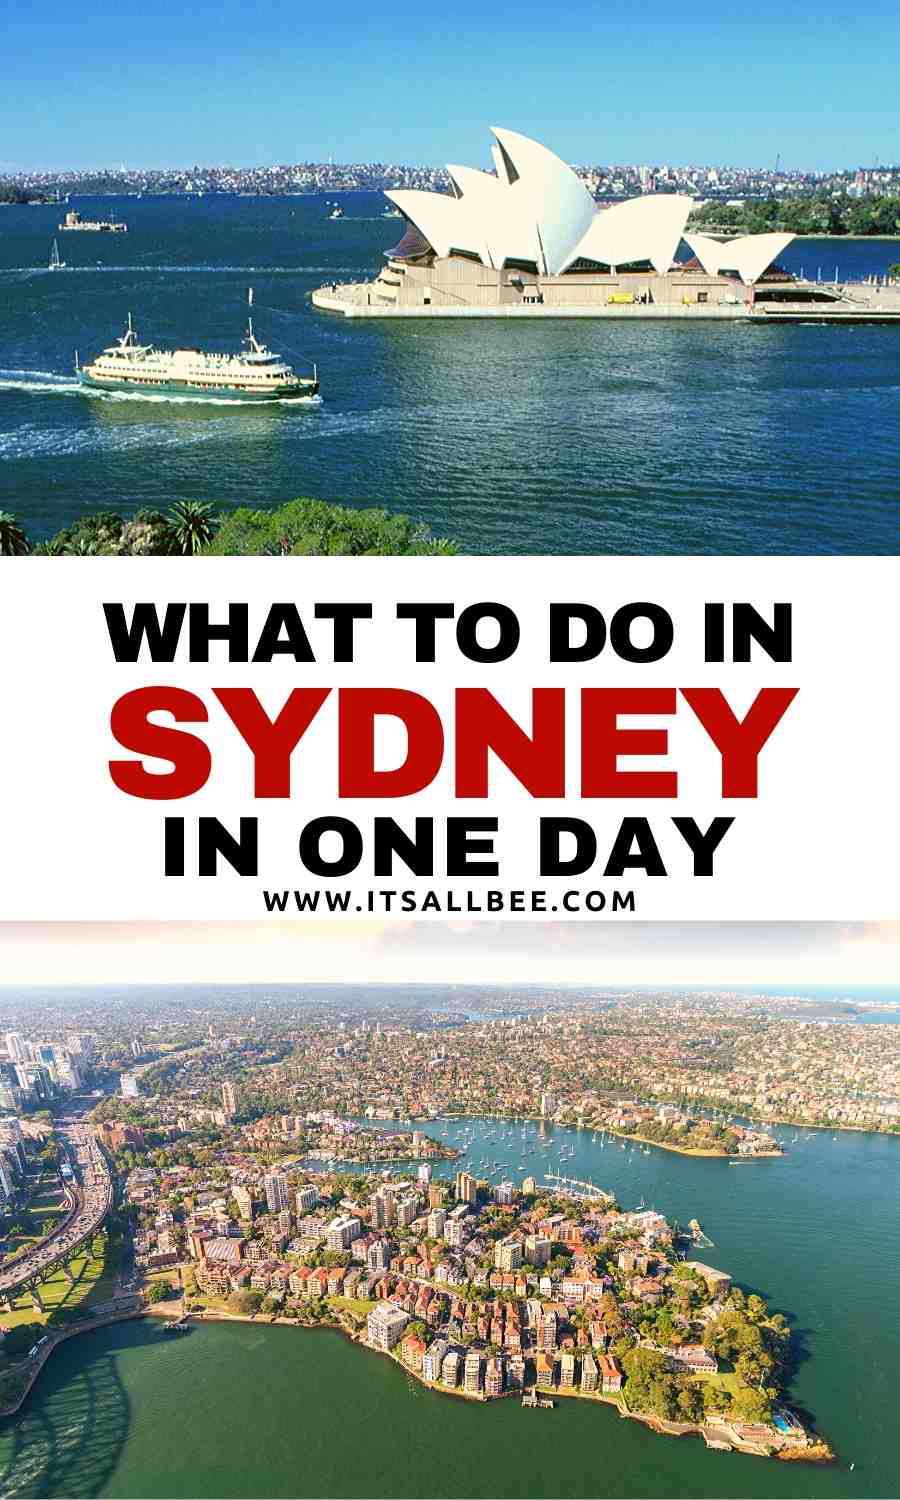 how to spend one day in Sydney australia itinerary